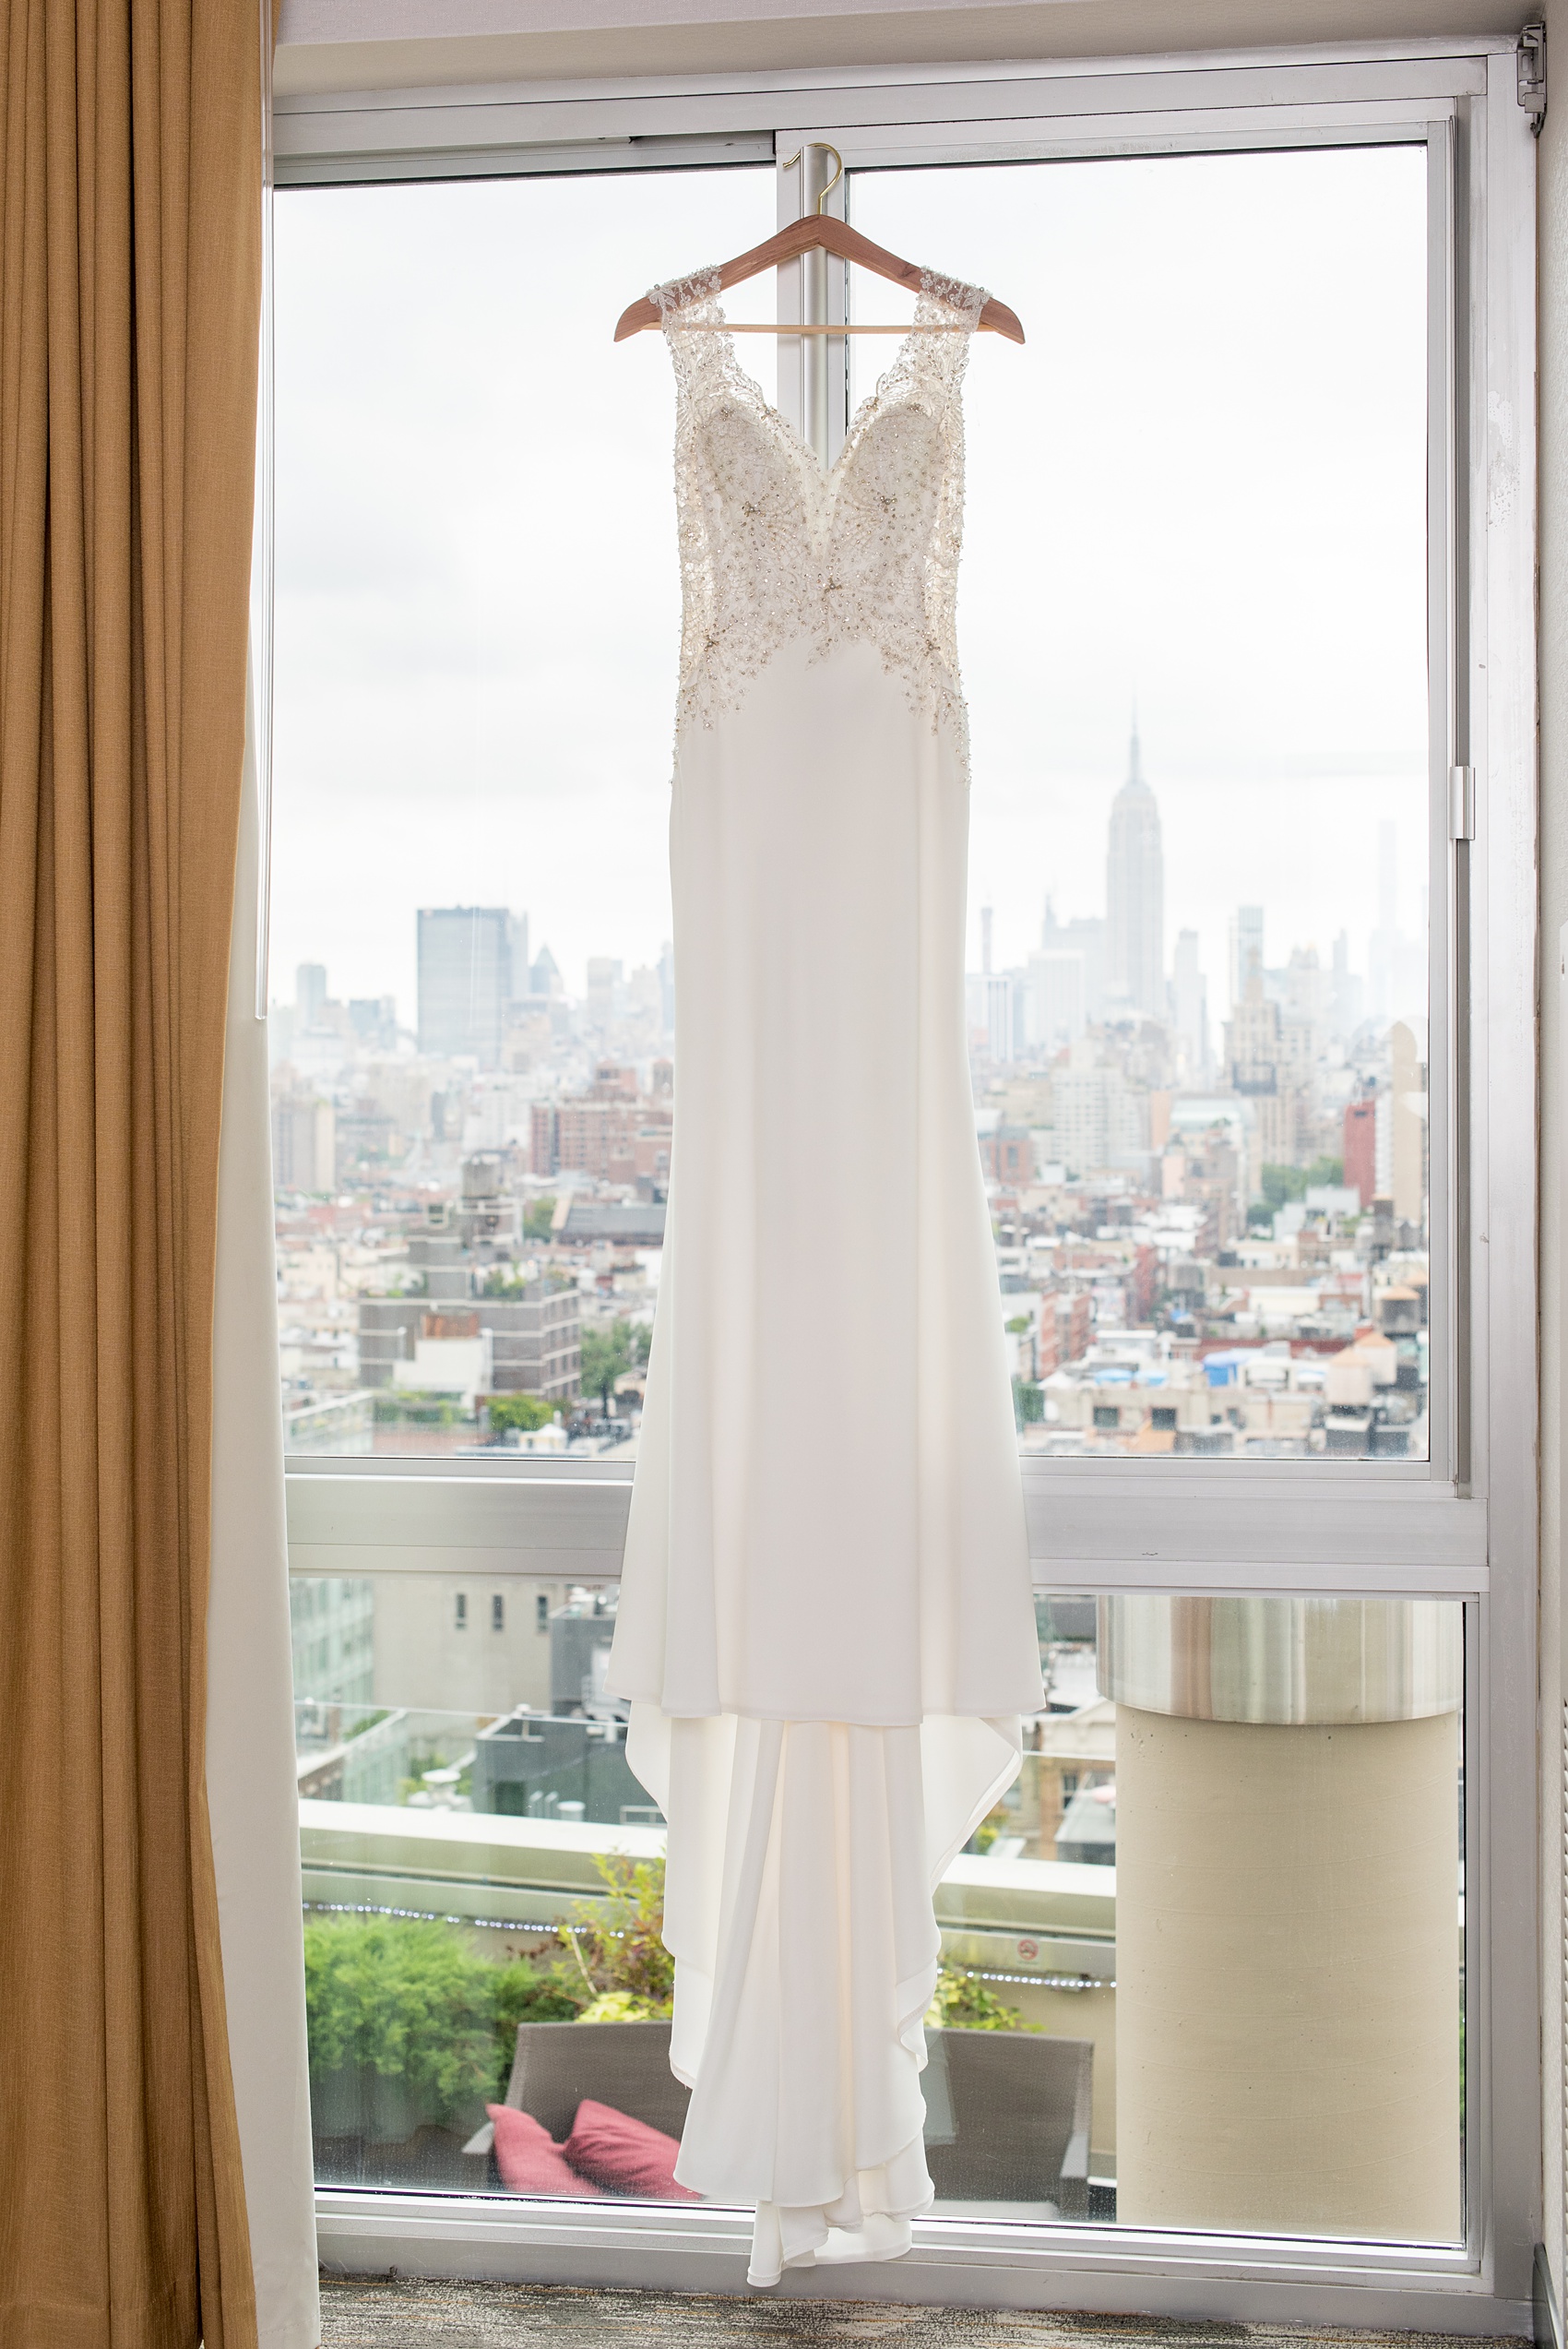 Photos of a NYC wedding venue, Tribeca Rooftop, by Mikkel Paige Photography. This ceremony and reception location has an outdoor space overlooking the Manhattan skyline. These pictures will provide inspiration in New York! The bride wore a lace illusion gown with beading, her hair up, and carried a bouquet of fall flowers. Click through for more details from this celebration! #TribecaRooftop #MikkelPaige #NYCwedding #NYCWeddingVenues #NYCWeddingPhotography #BridalGown #RKBridal